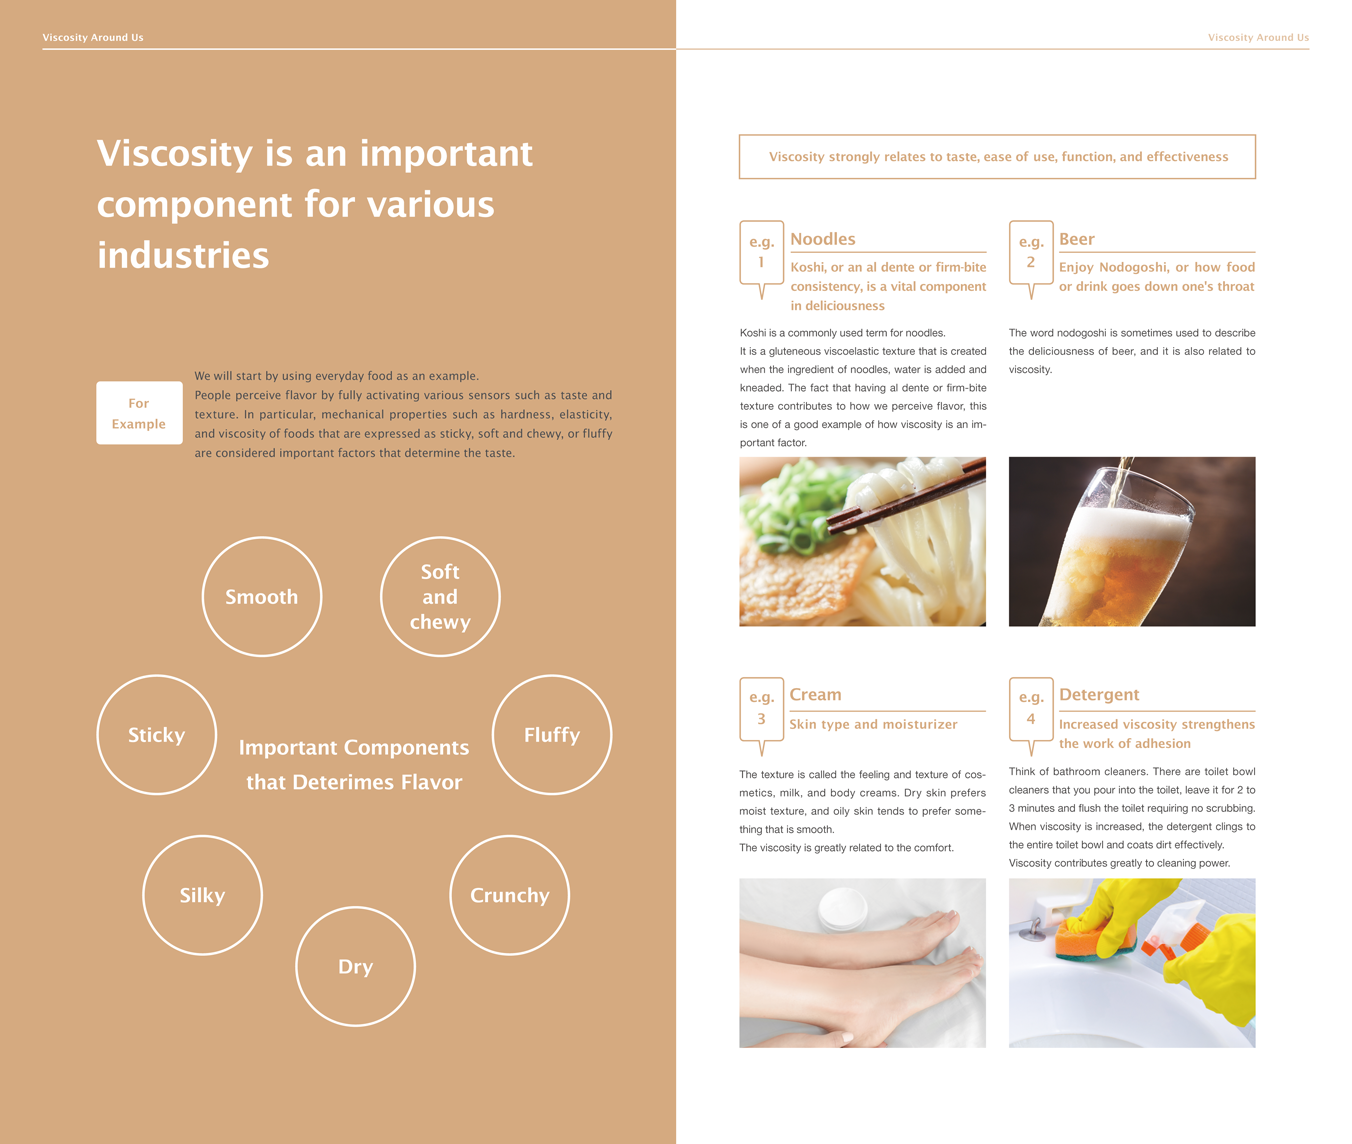 Viscosity is an important component for various industries